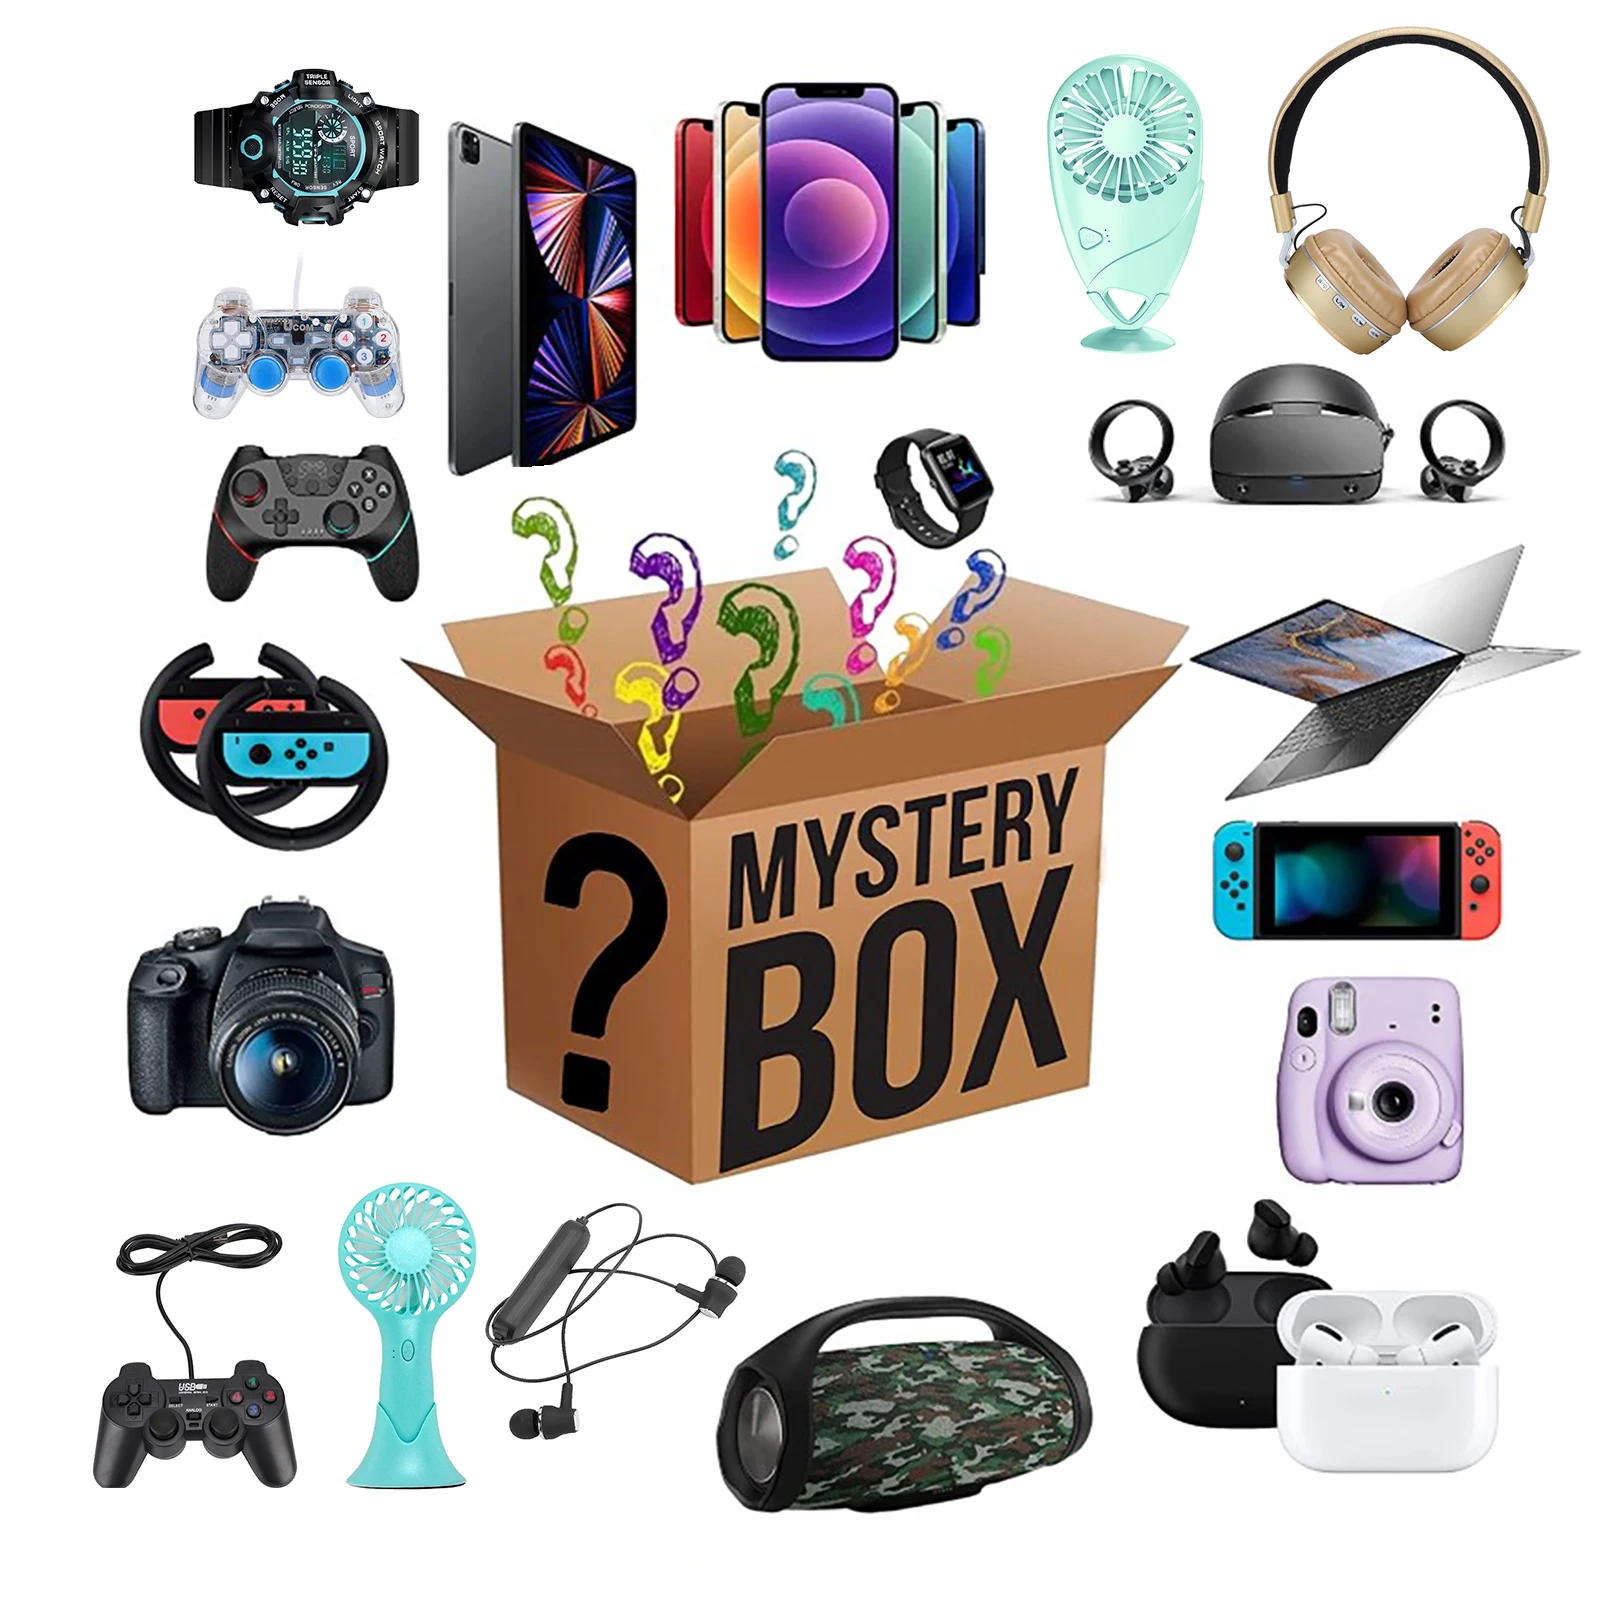 OMKMNOE Surprise Boxes Mystery Box Lucky Box Chance To Open Mystery Random Products There is a lucky box etc super cheaper,A